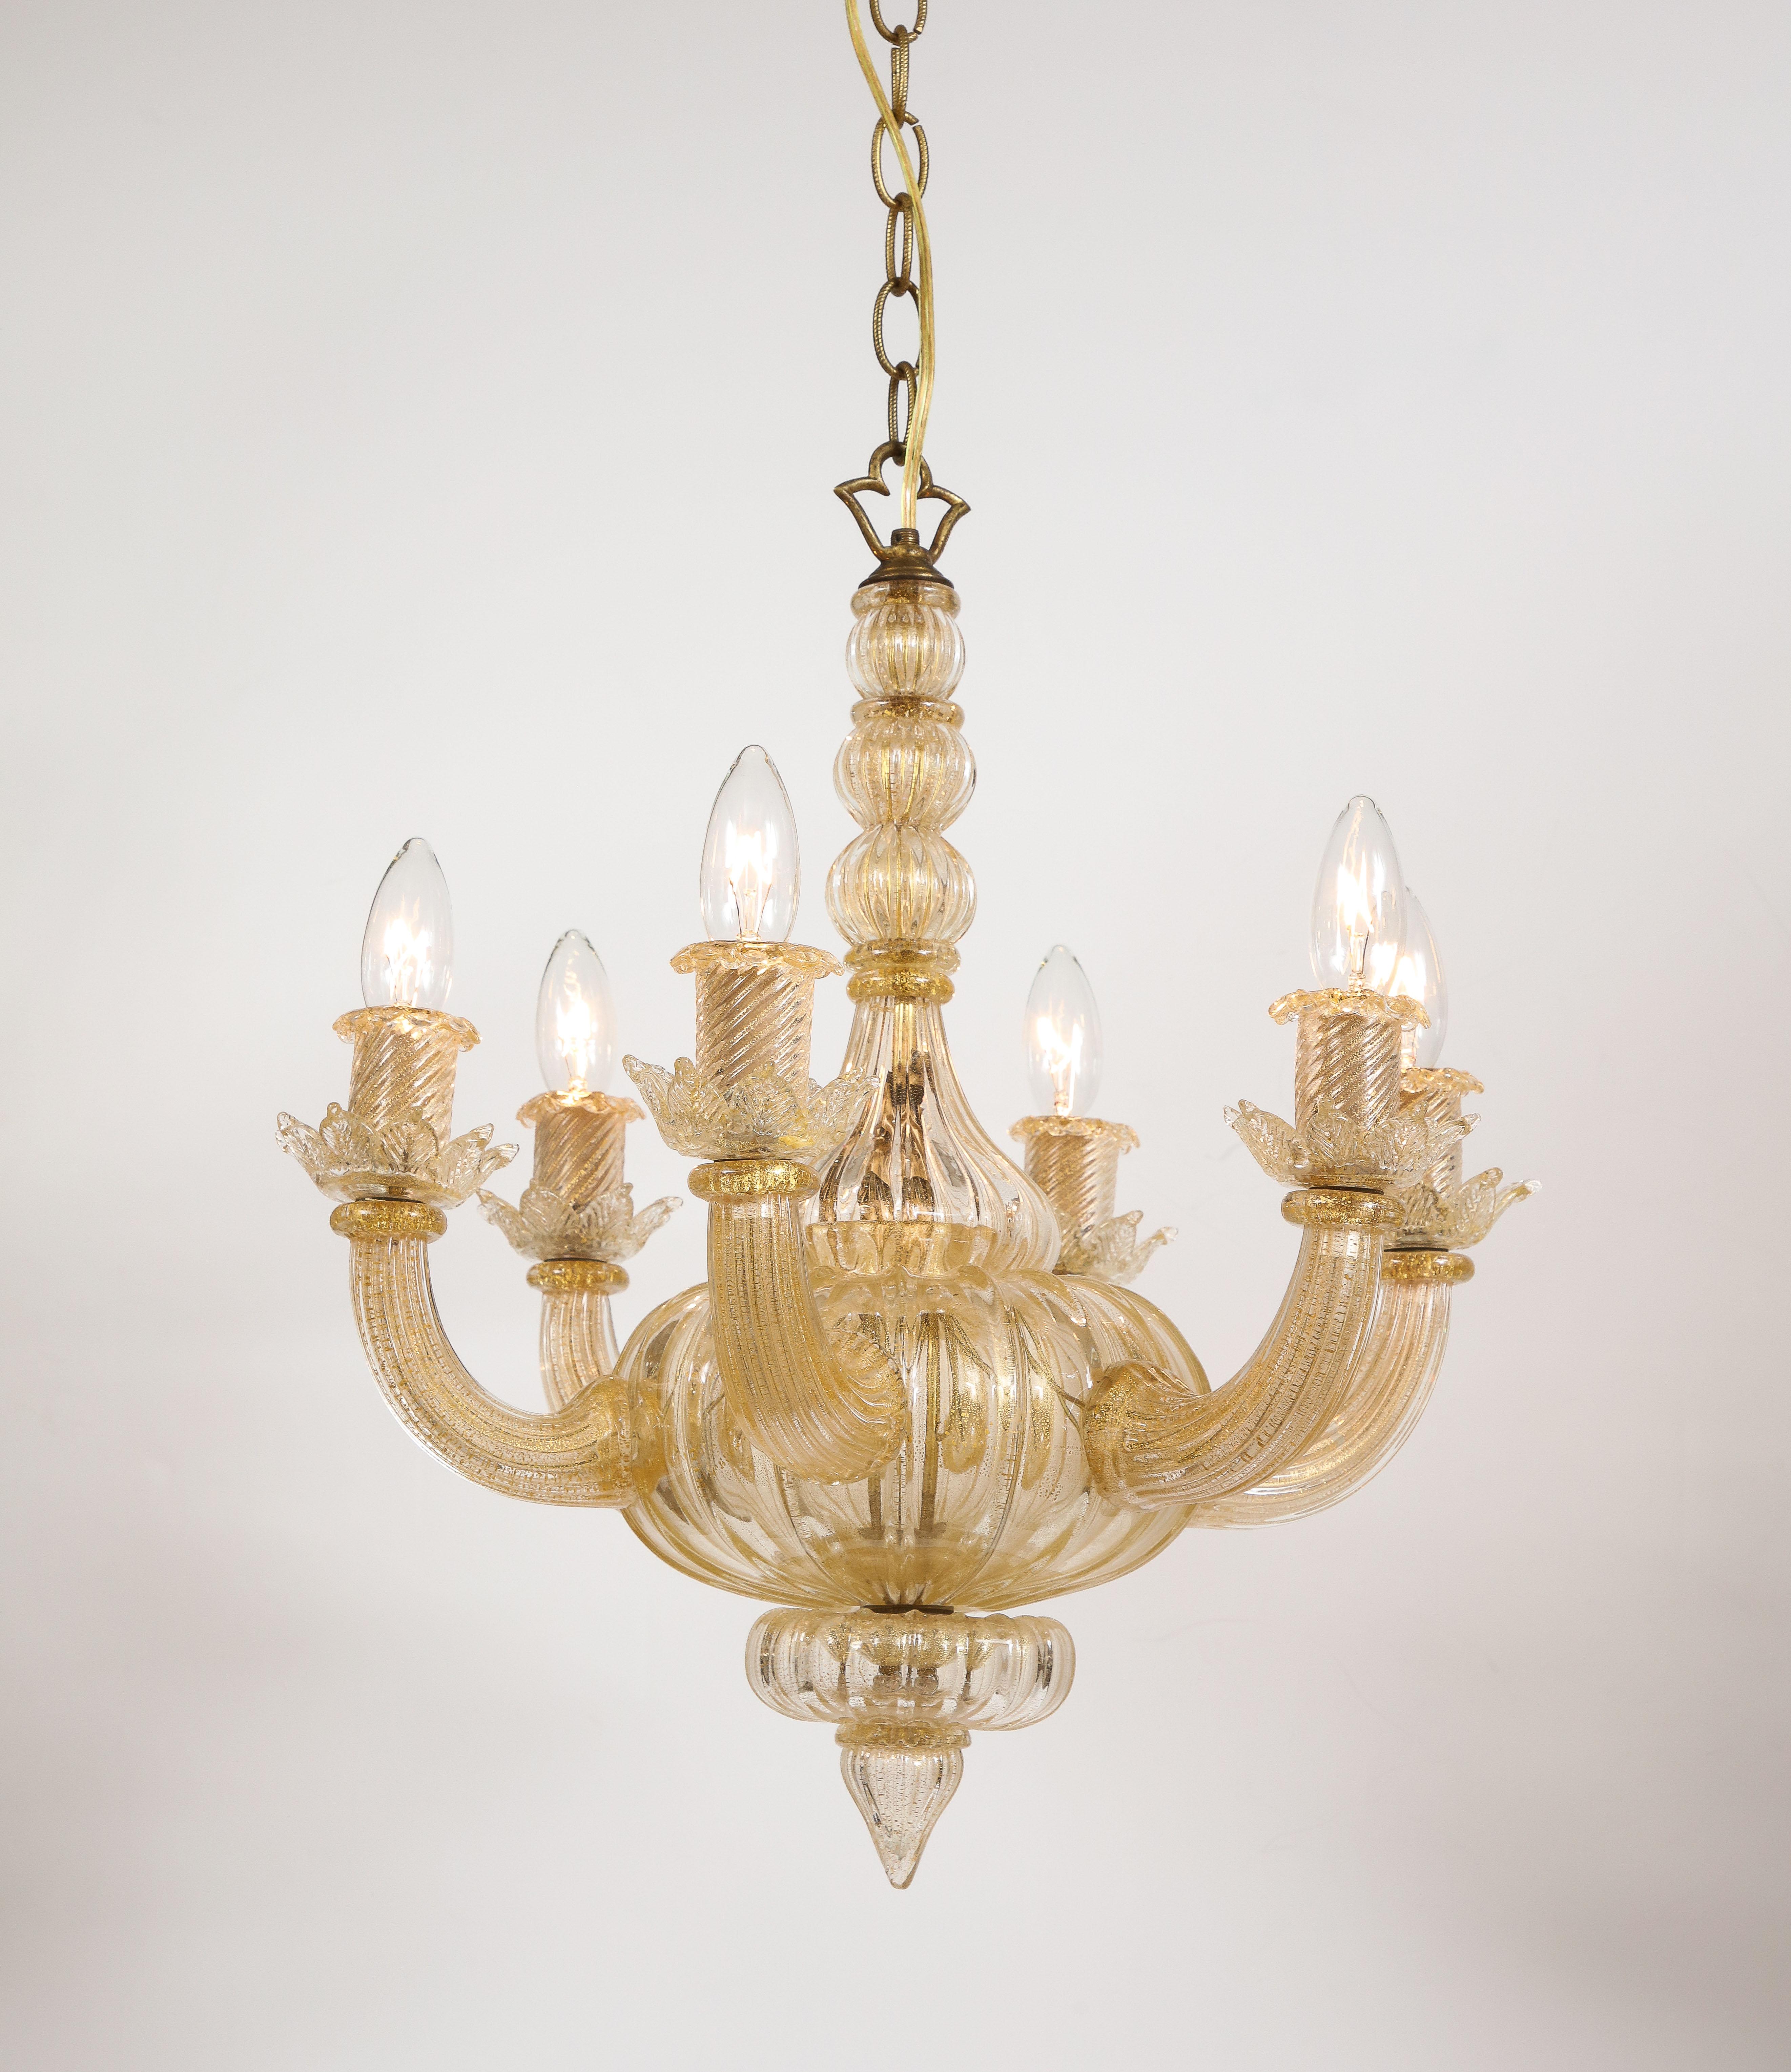 Gold Italian Murano Midcentury 6 Arm Neoclassical Style Chandelier For Sale 6